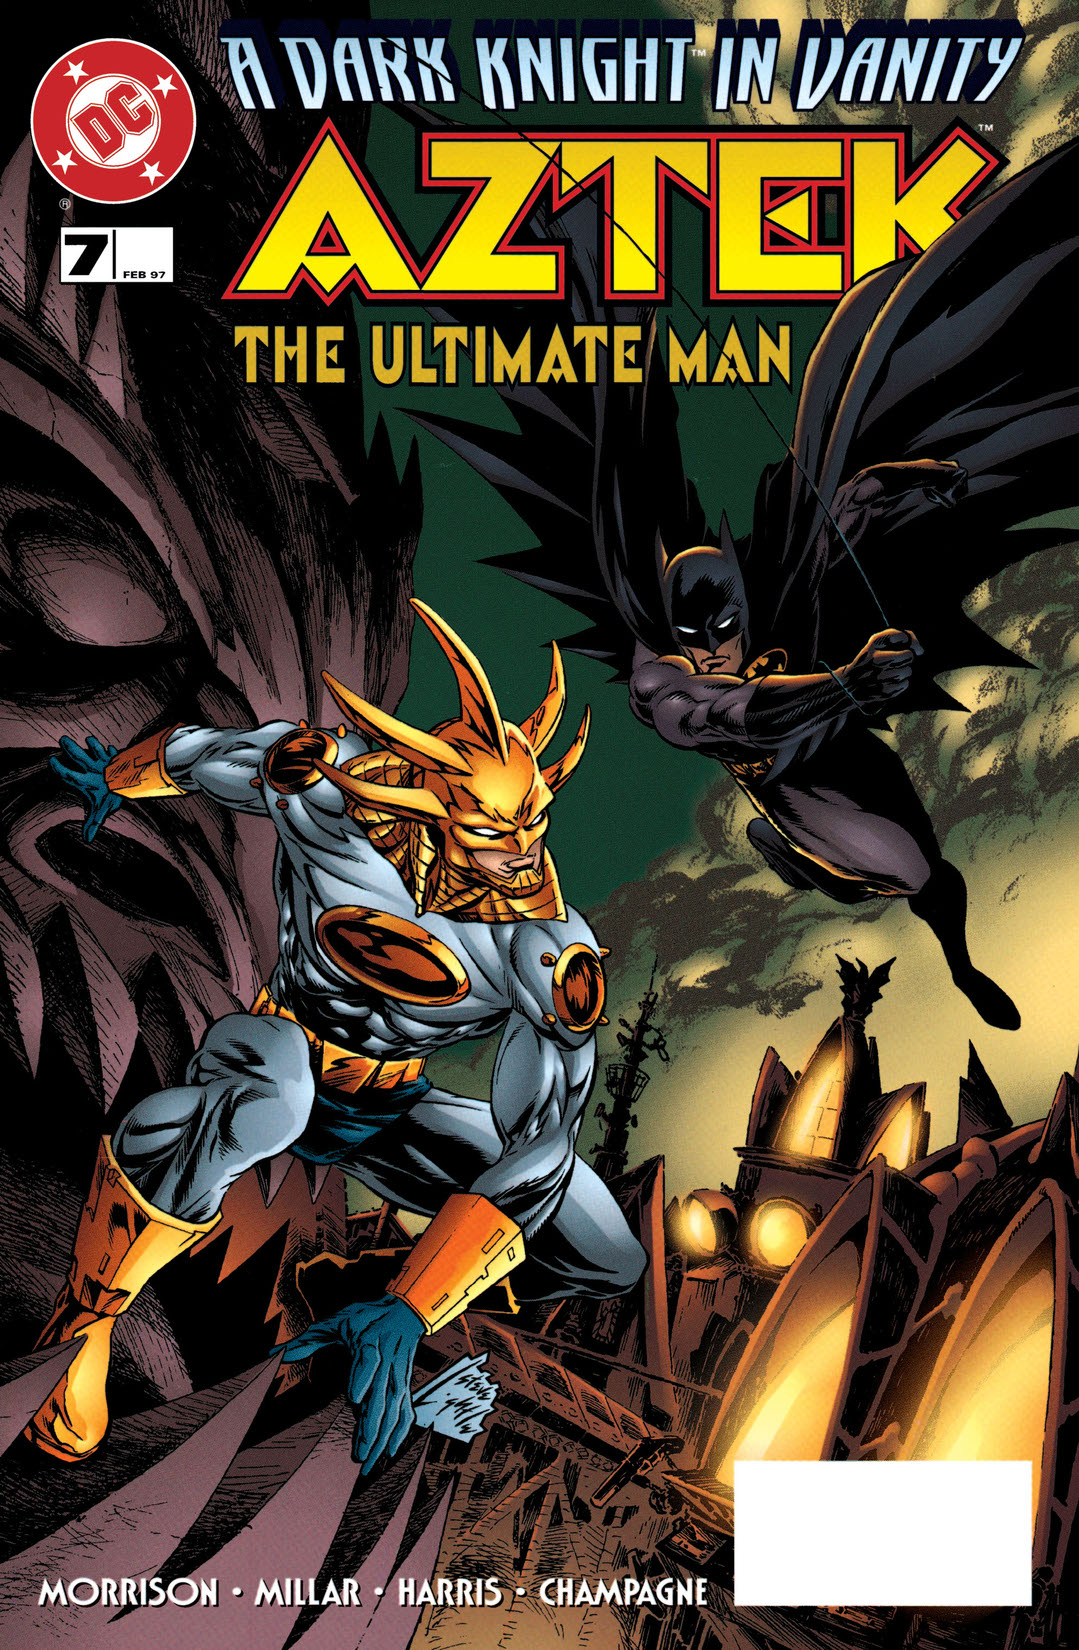 Aztek: The Ultimate Man #7 preview images